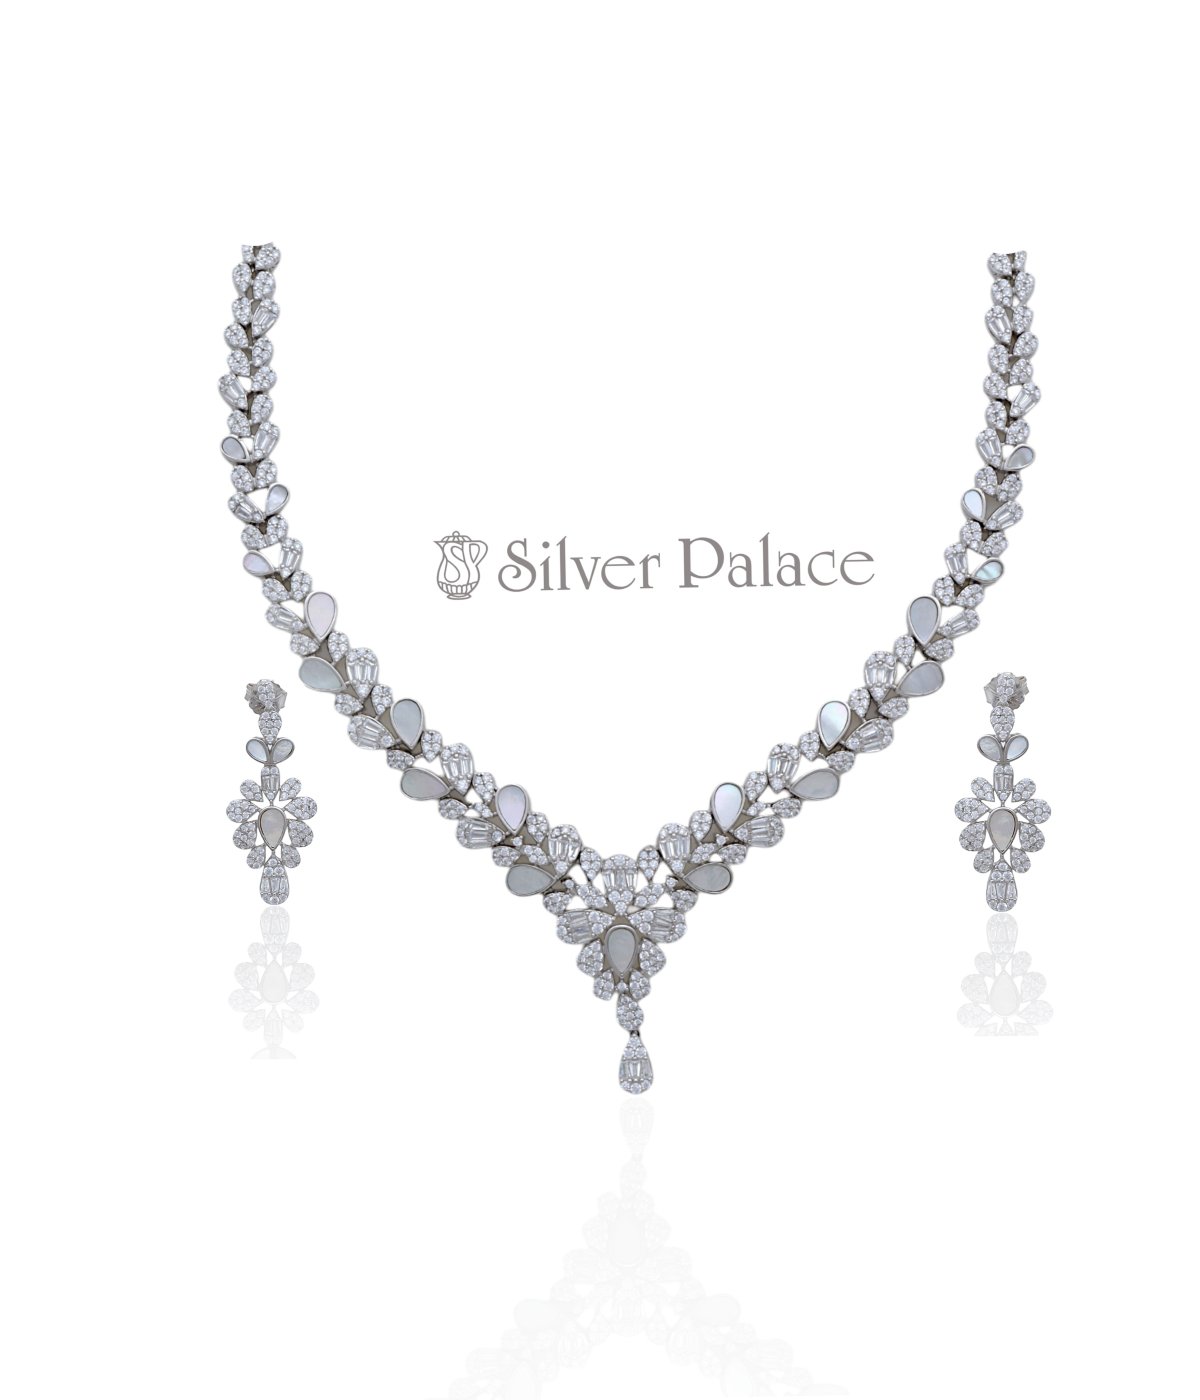 92.5 Silver Crystal Filigree Necklace Earrings Sets Wedding Jewelry Accessories